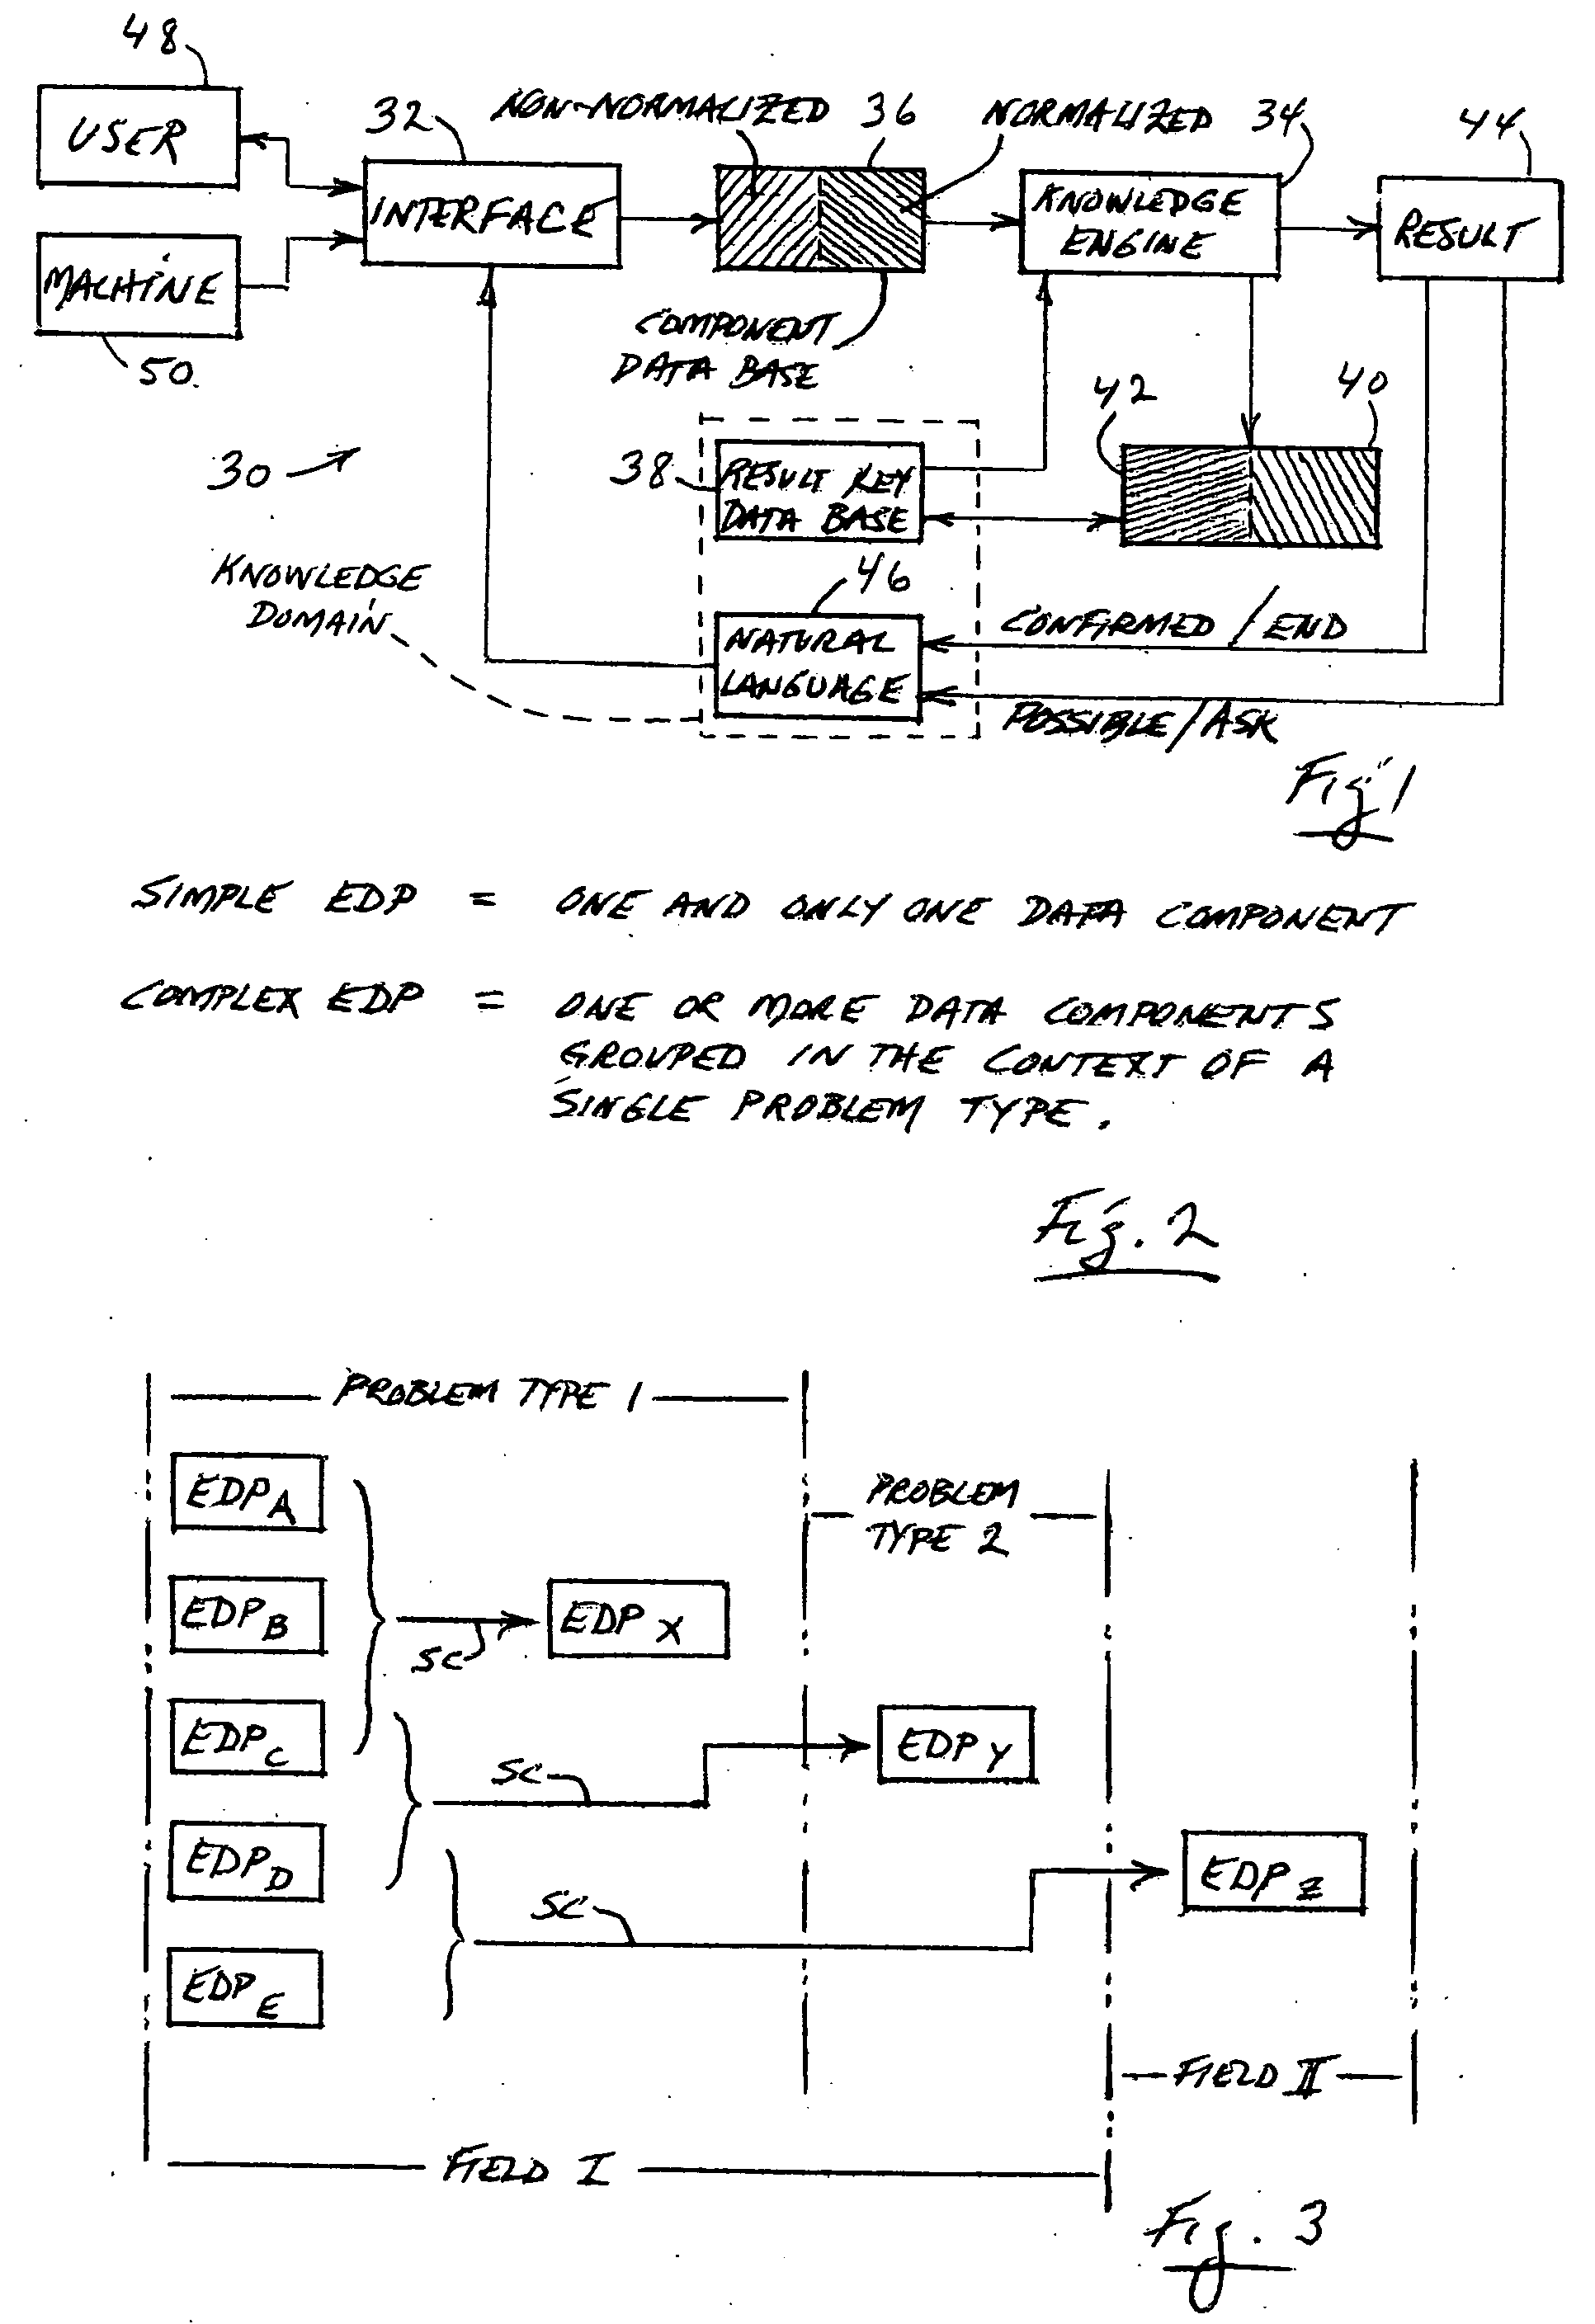 Computer-based intelligence method and apparatus for assessing selected subject-area problems and situations